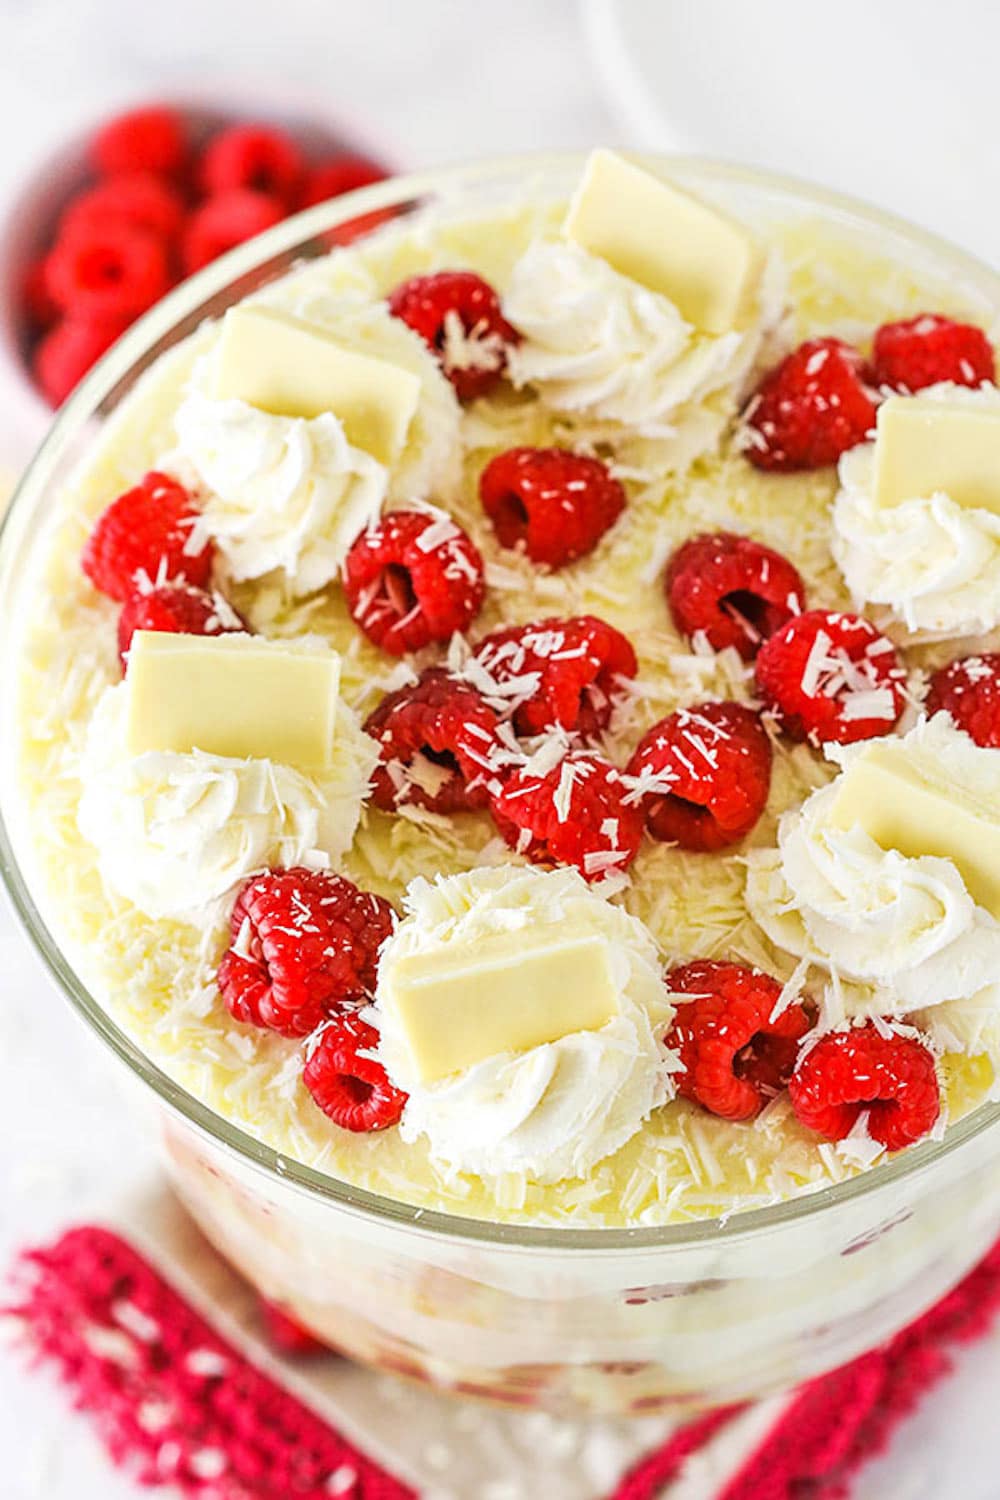 A White Chocolate Raspberry Trifle Next to a Bowl of Raspberries, Seen from Above